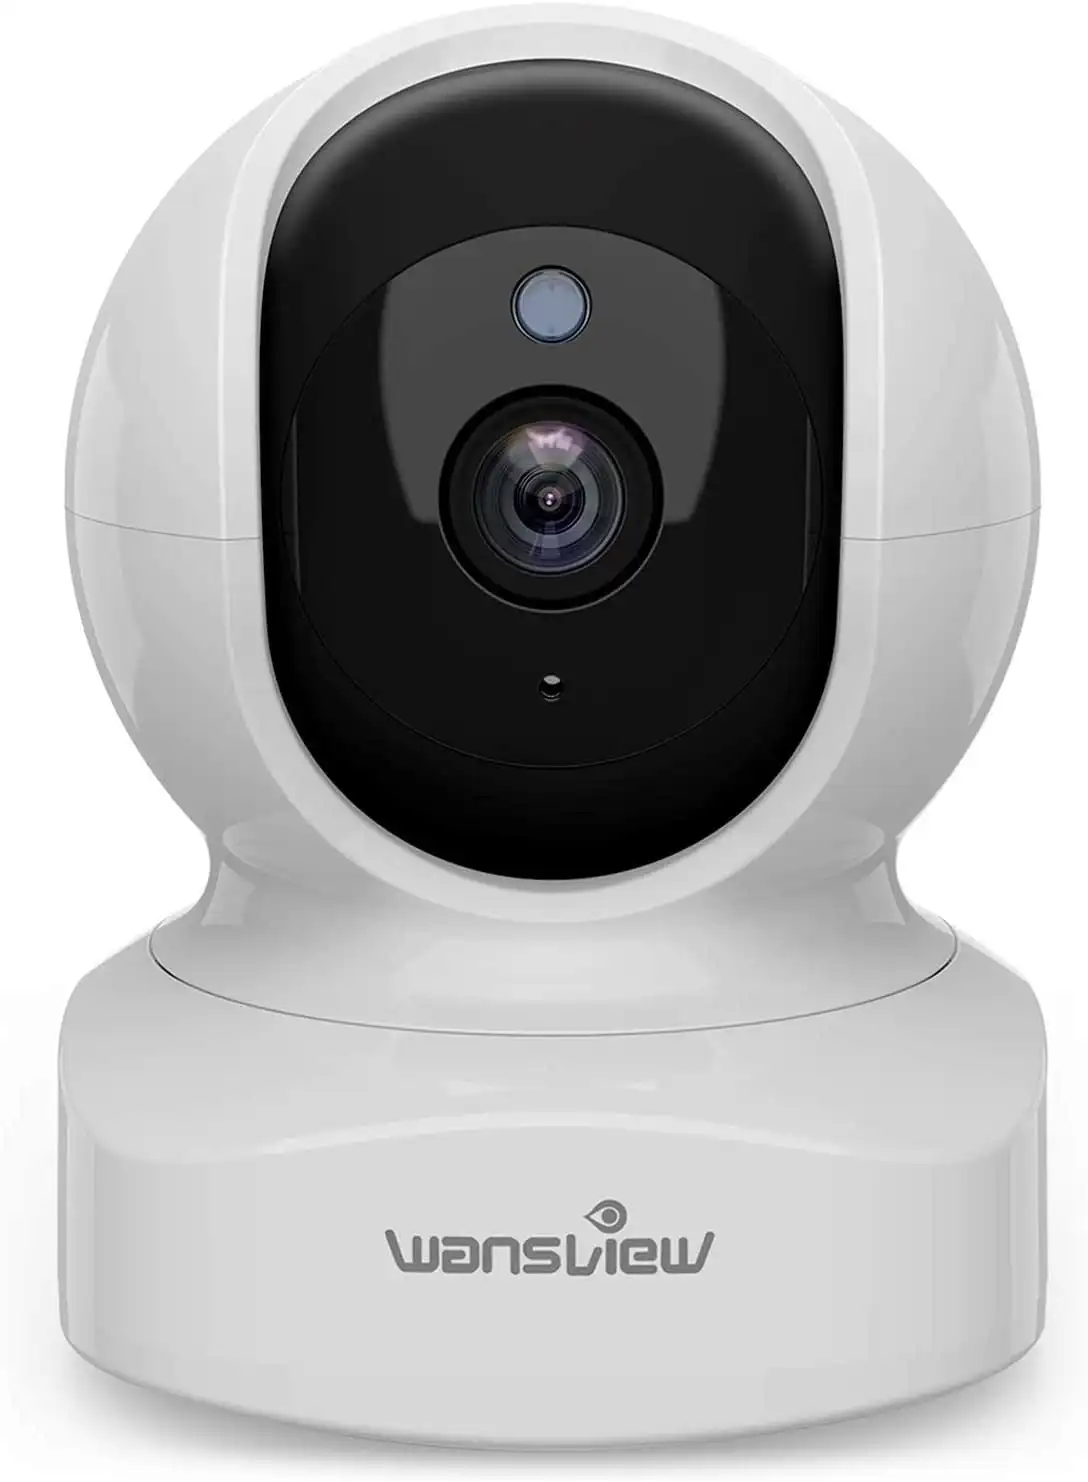 Wansview Home Security Camera, Baby Camera,1080P HD Wansview Wireless WiFi Camera for Pet/Nanny, Motion Alerts, 2 Way Audio, Night Vision, Compatible